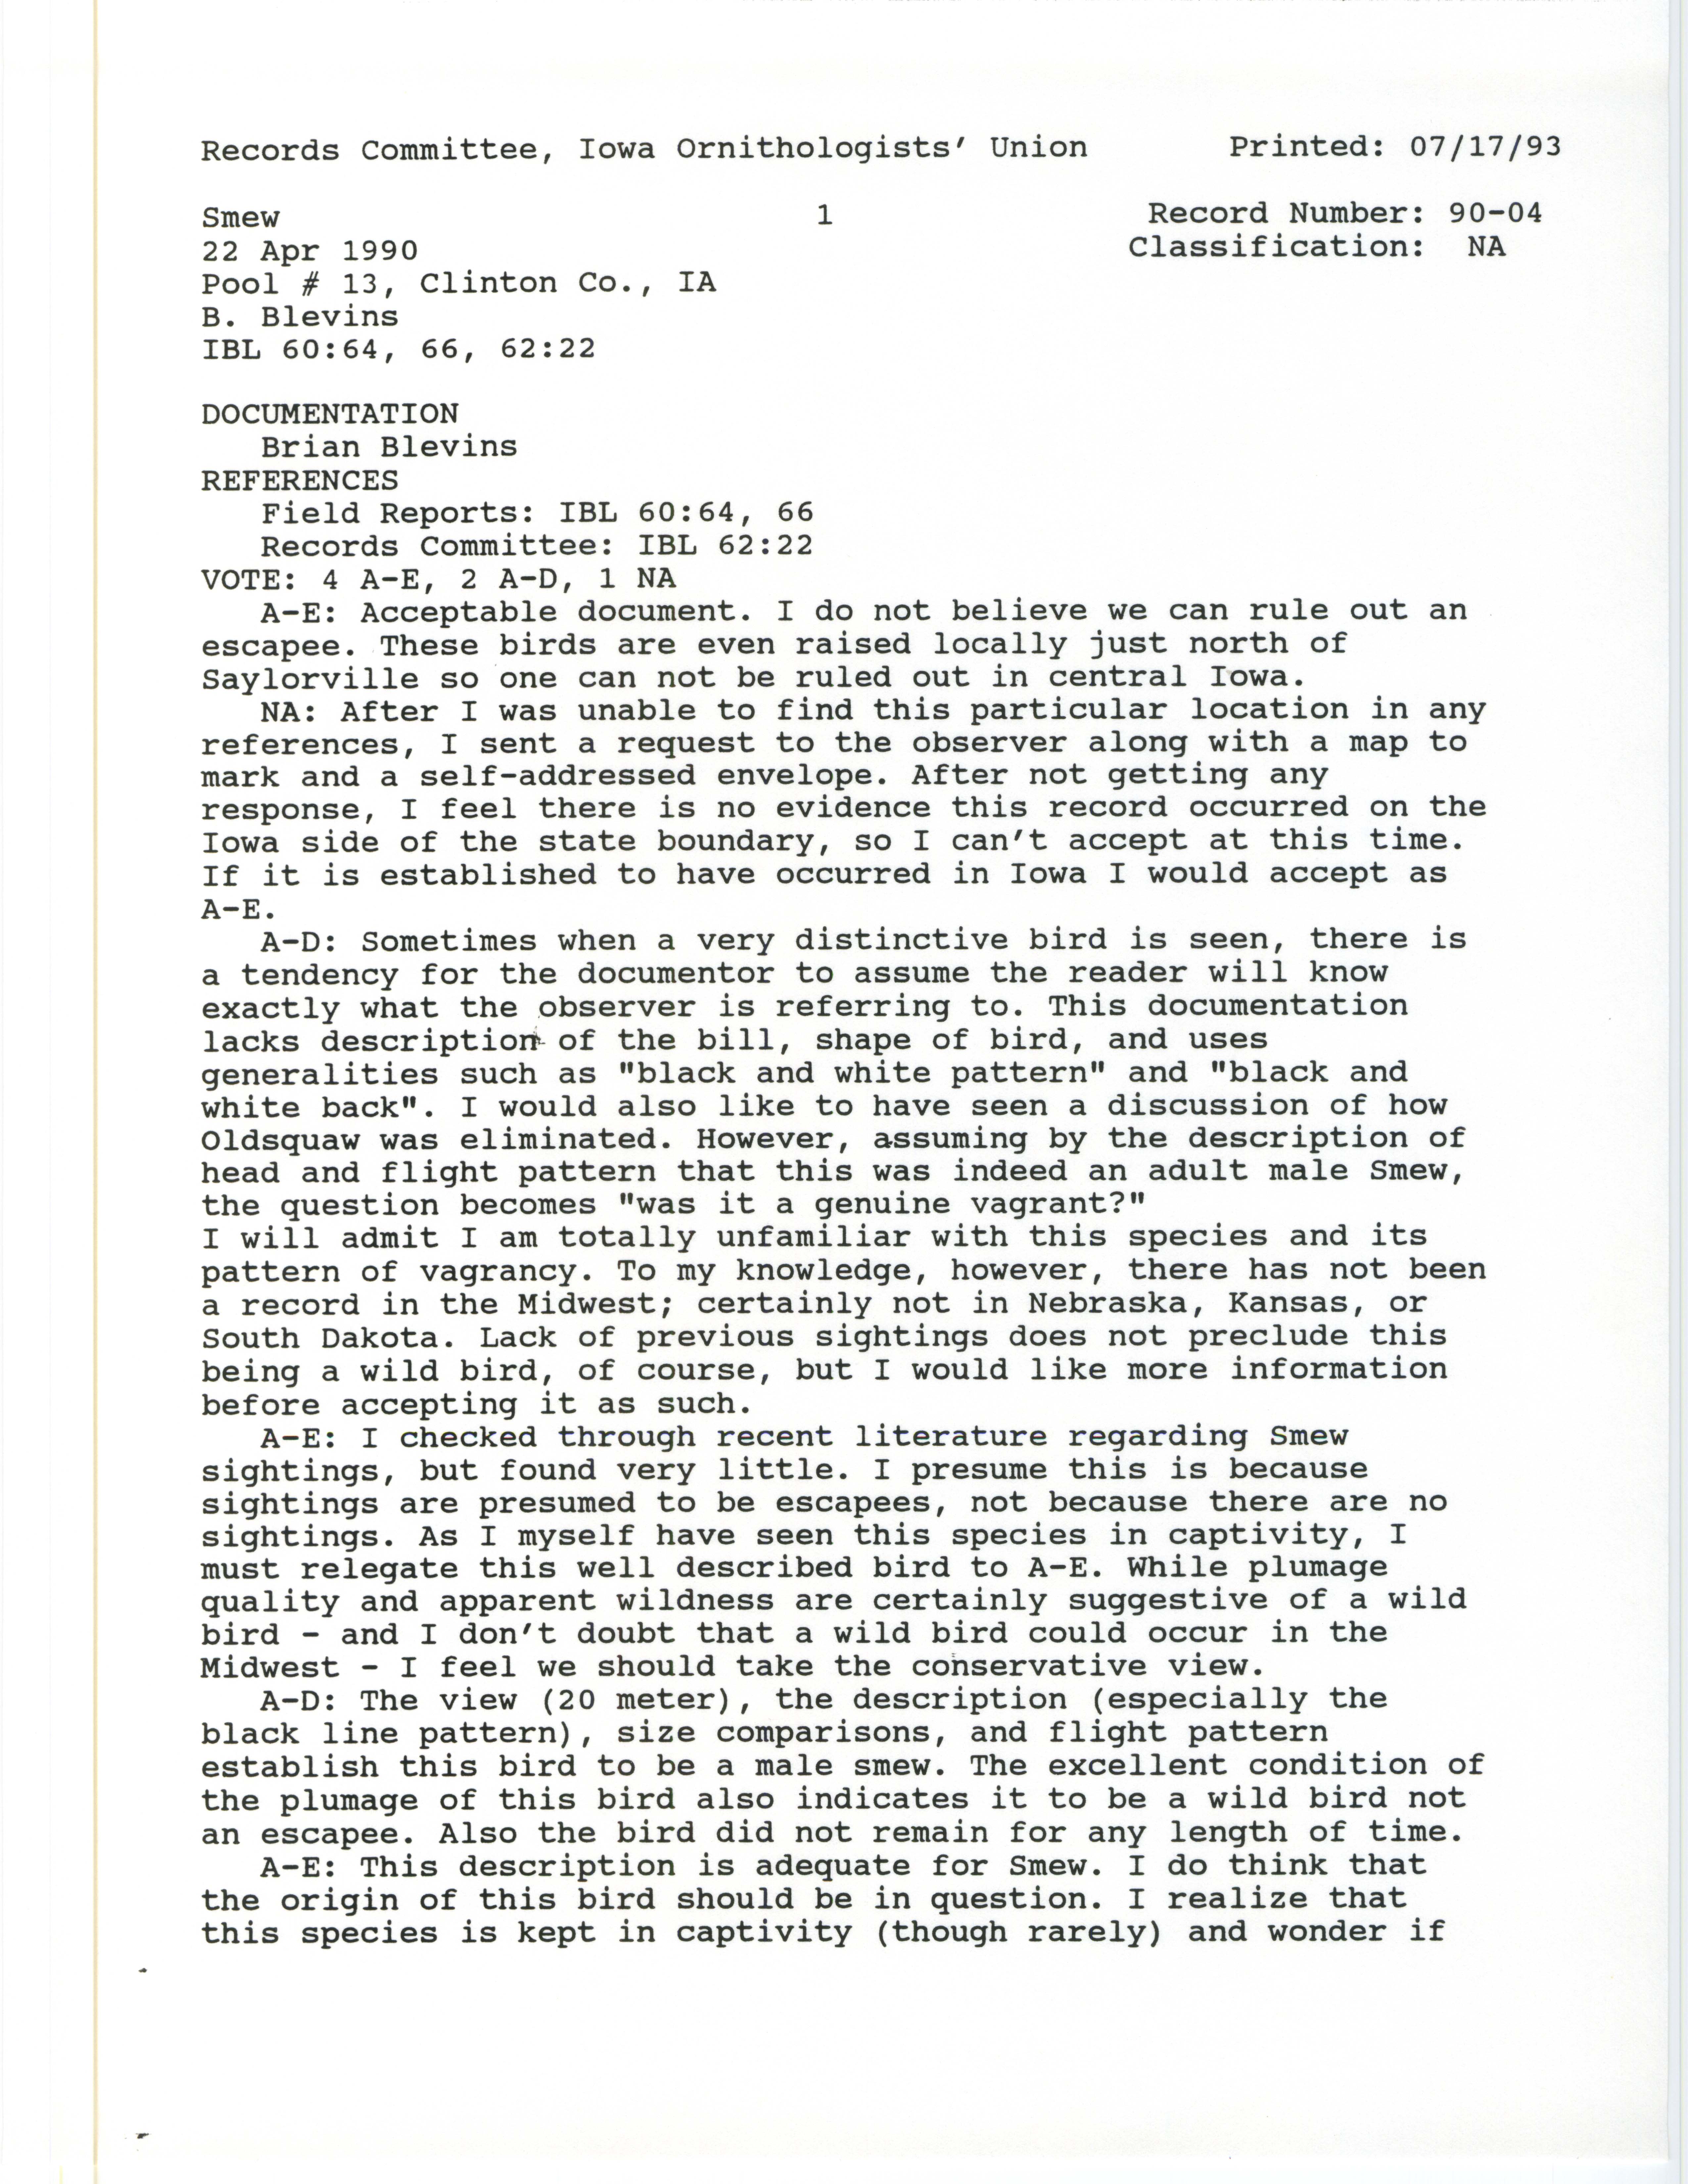 Records Committee review for rare bird sighting for Smew at Pool #13 in Clinton County, 1990